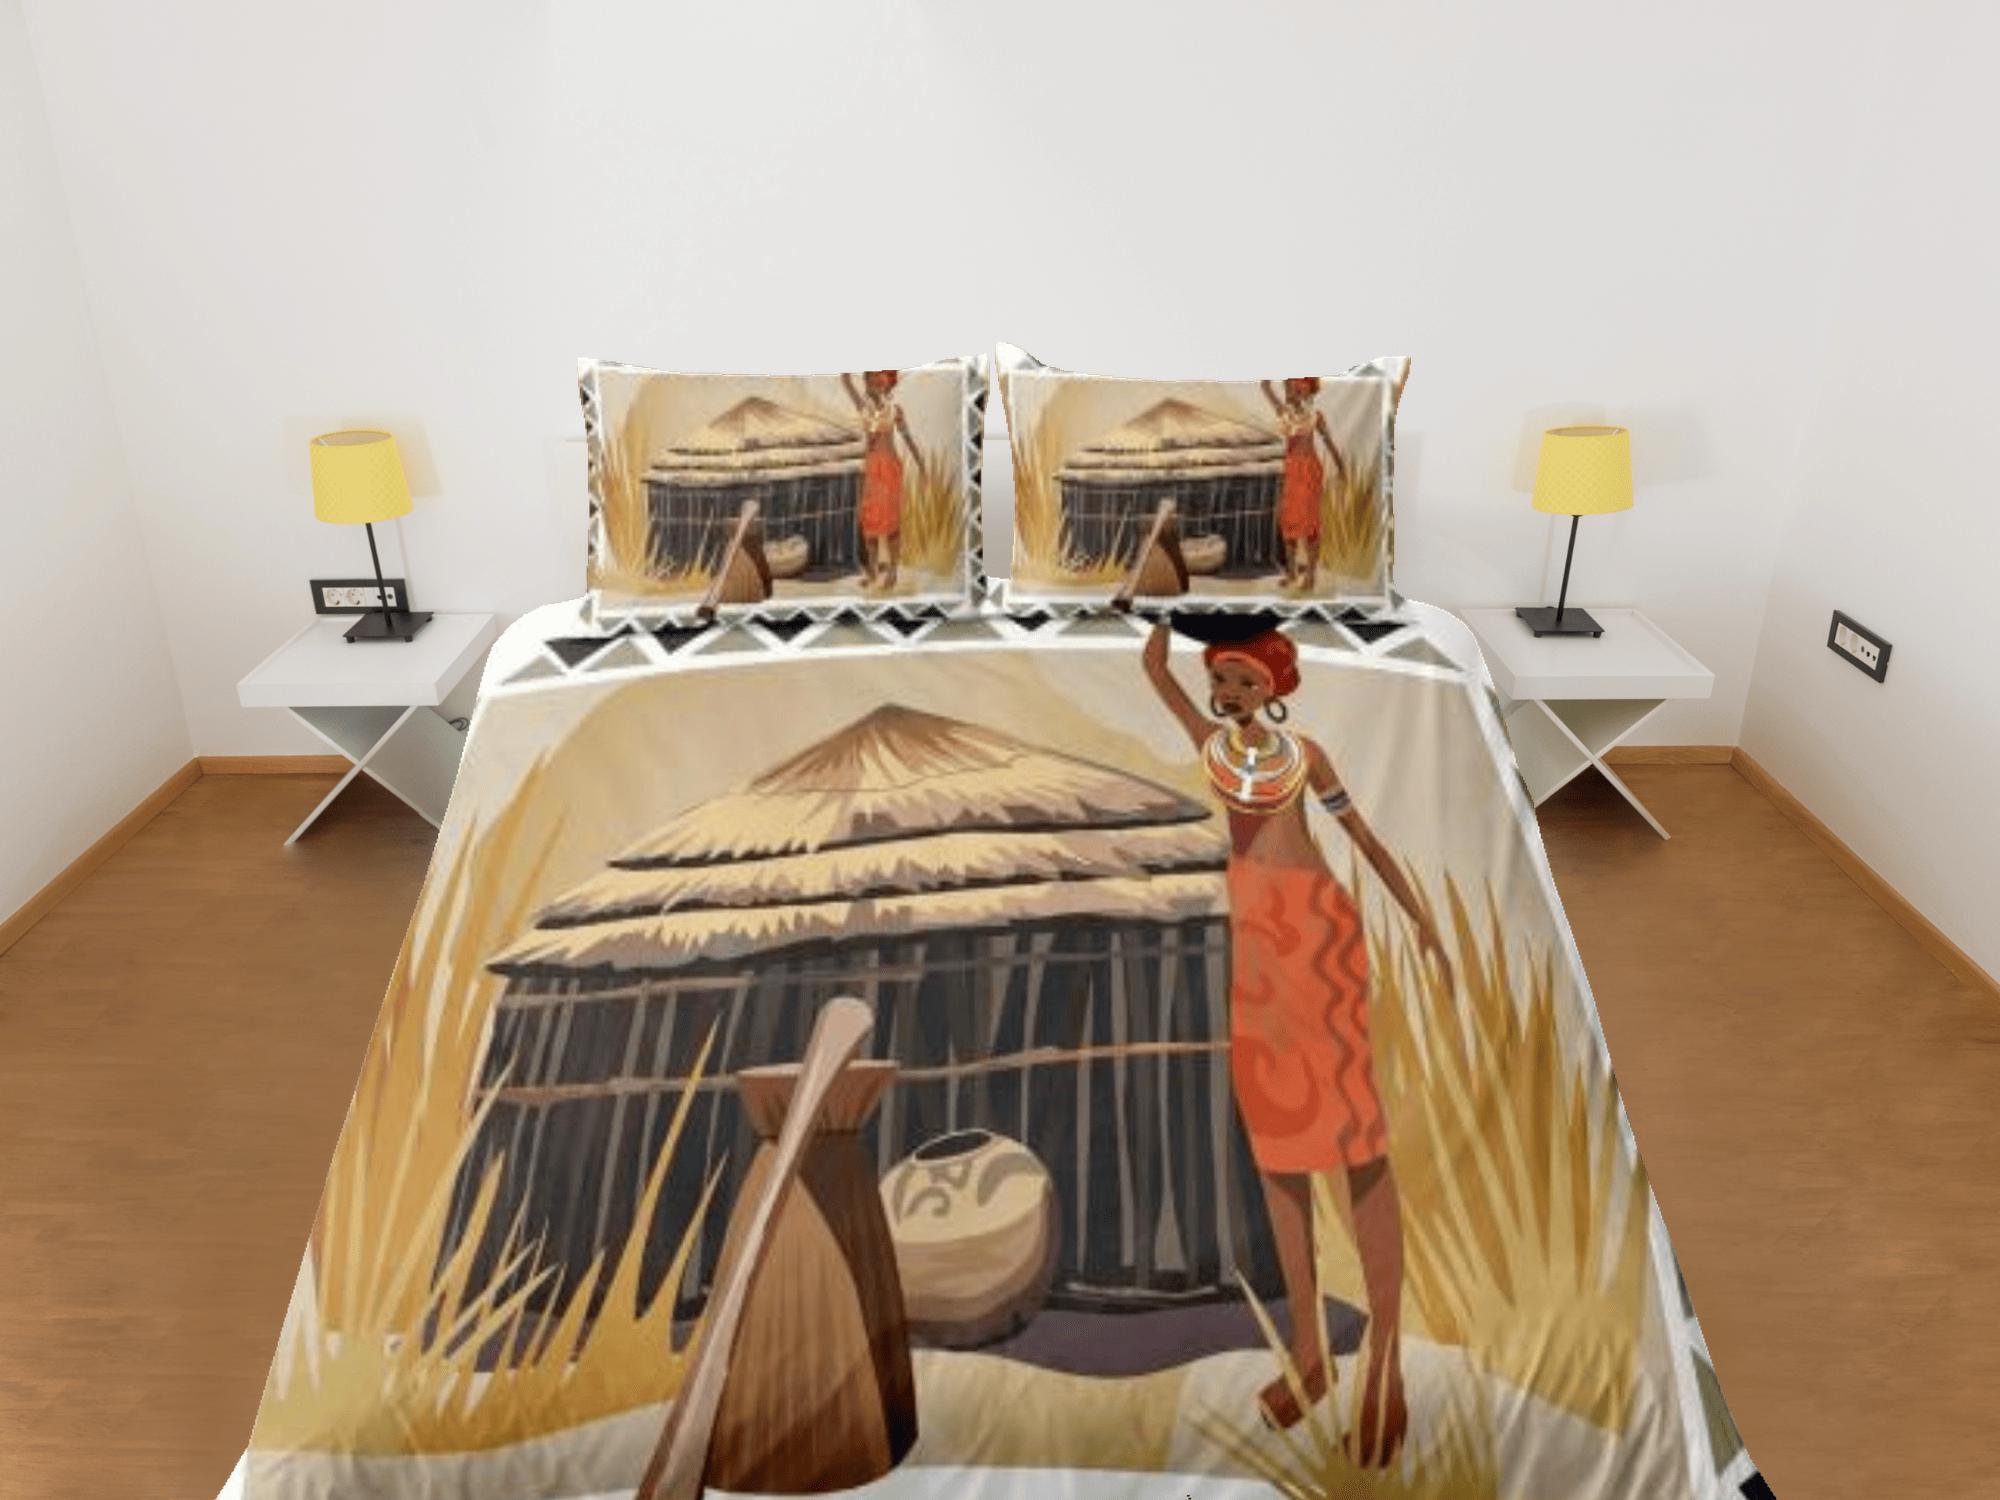 daintyduvet African woman painting bedding set duvet cover, boho bedding, african ethnic designs, afrocentric art designer bedding, south african gift